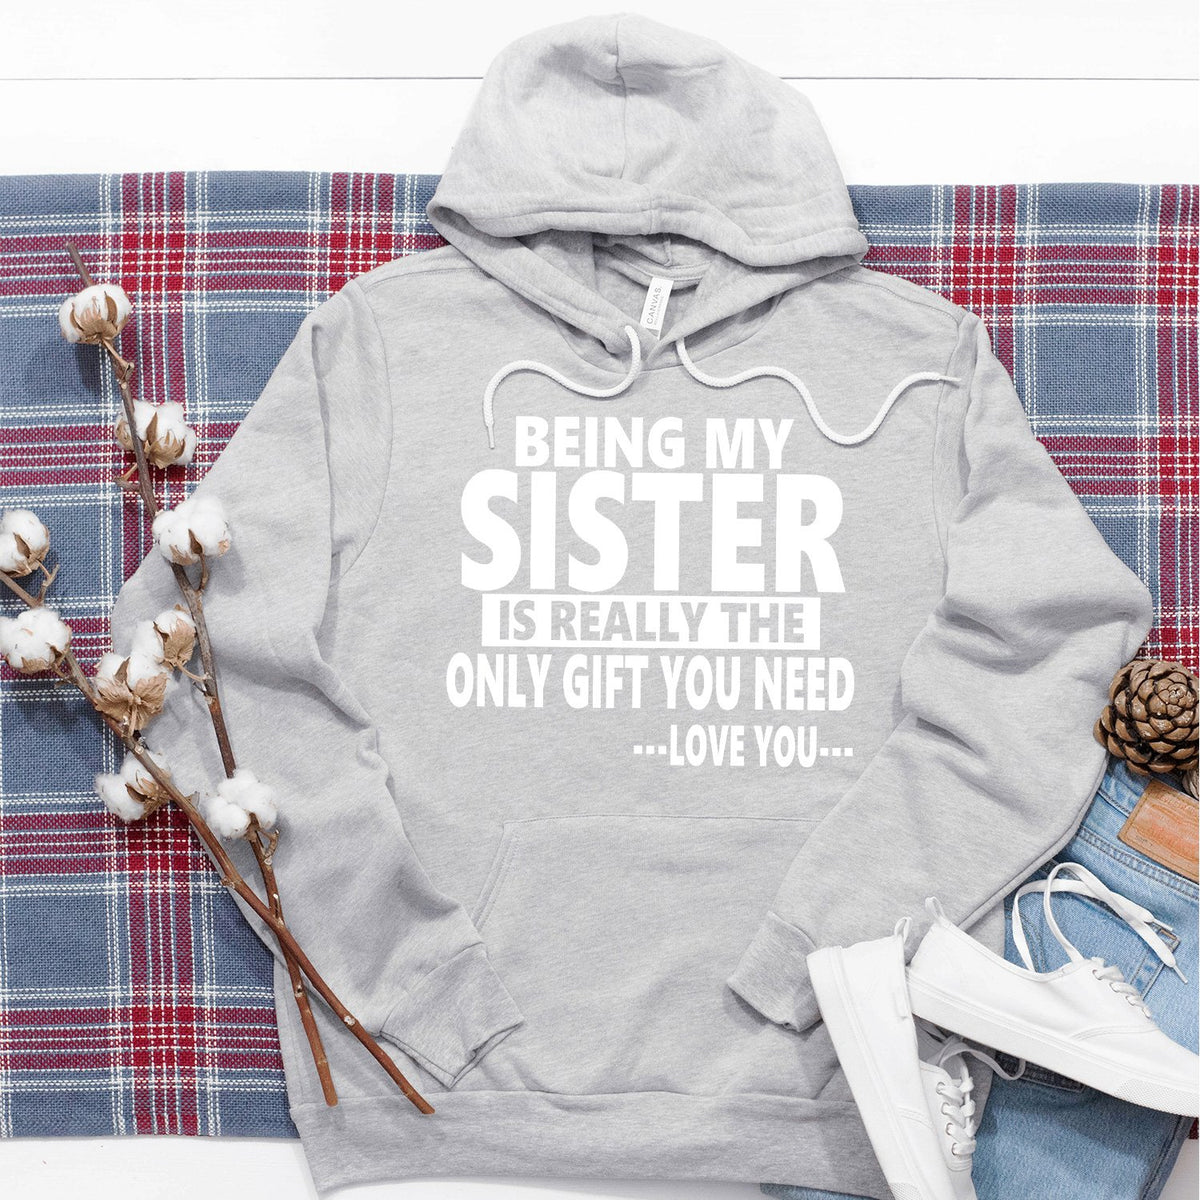 Being My Sister is Really The Only Gift You Need...Love You... - Hoodie Sweatshirt